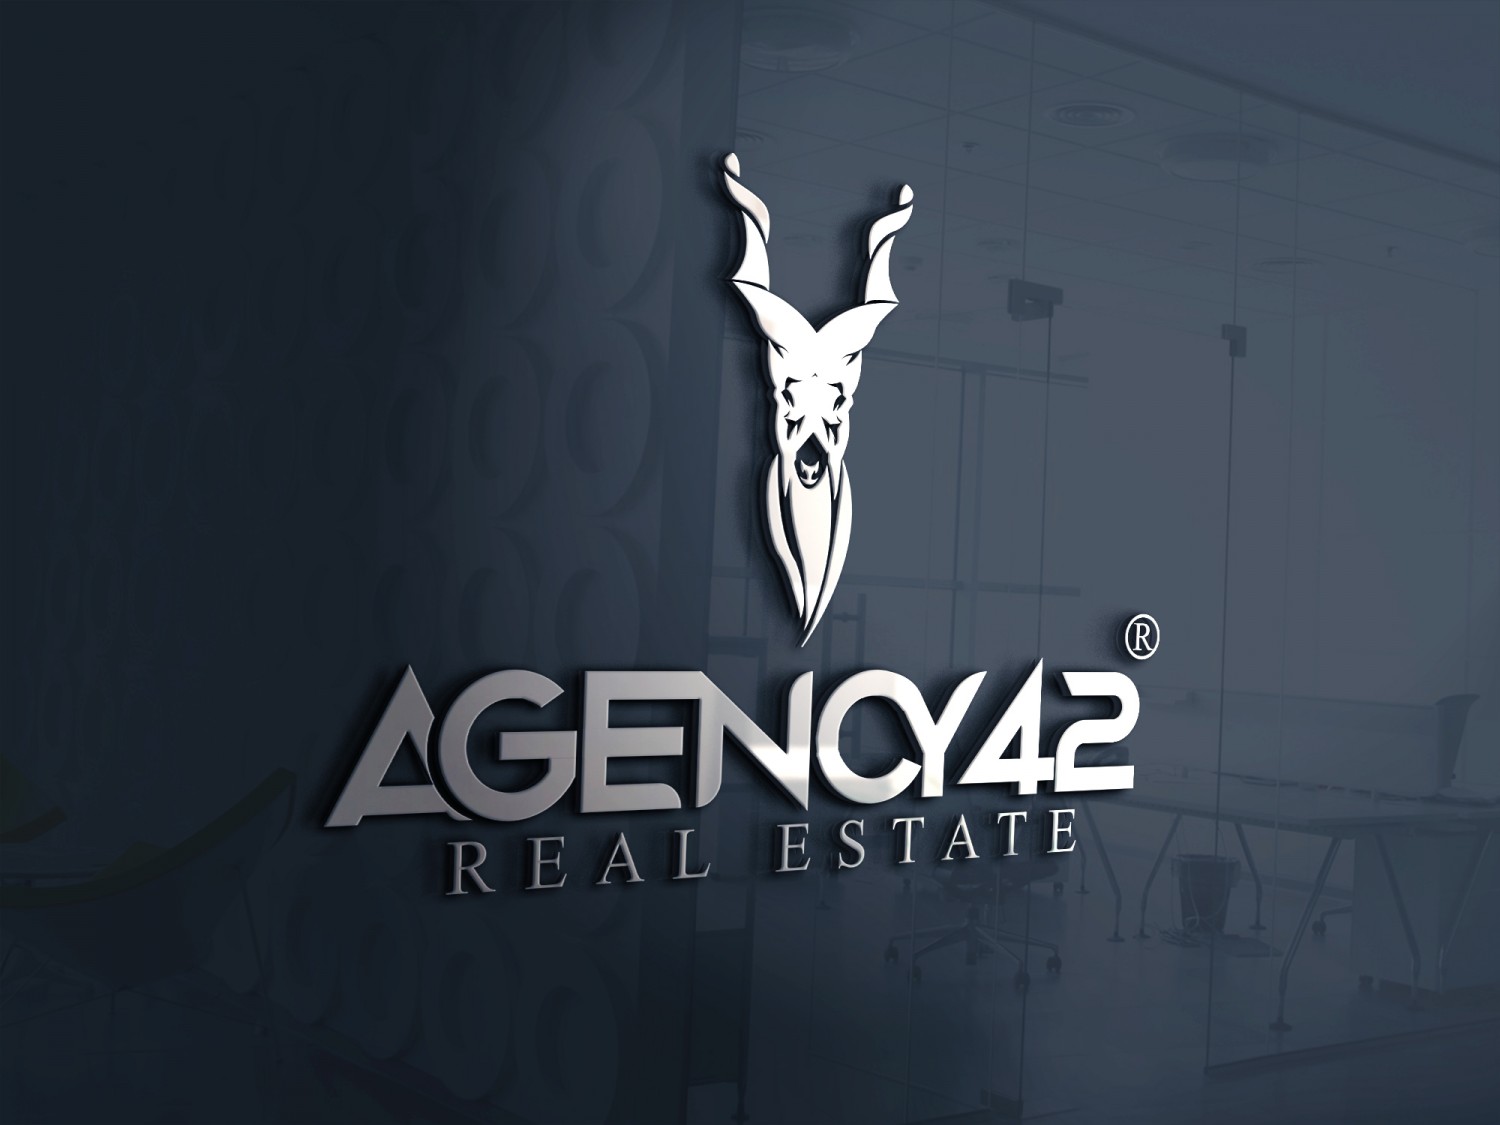 Agency42 Real Estate